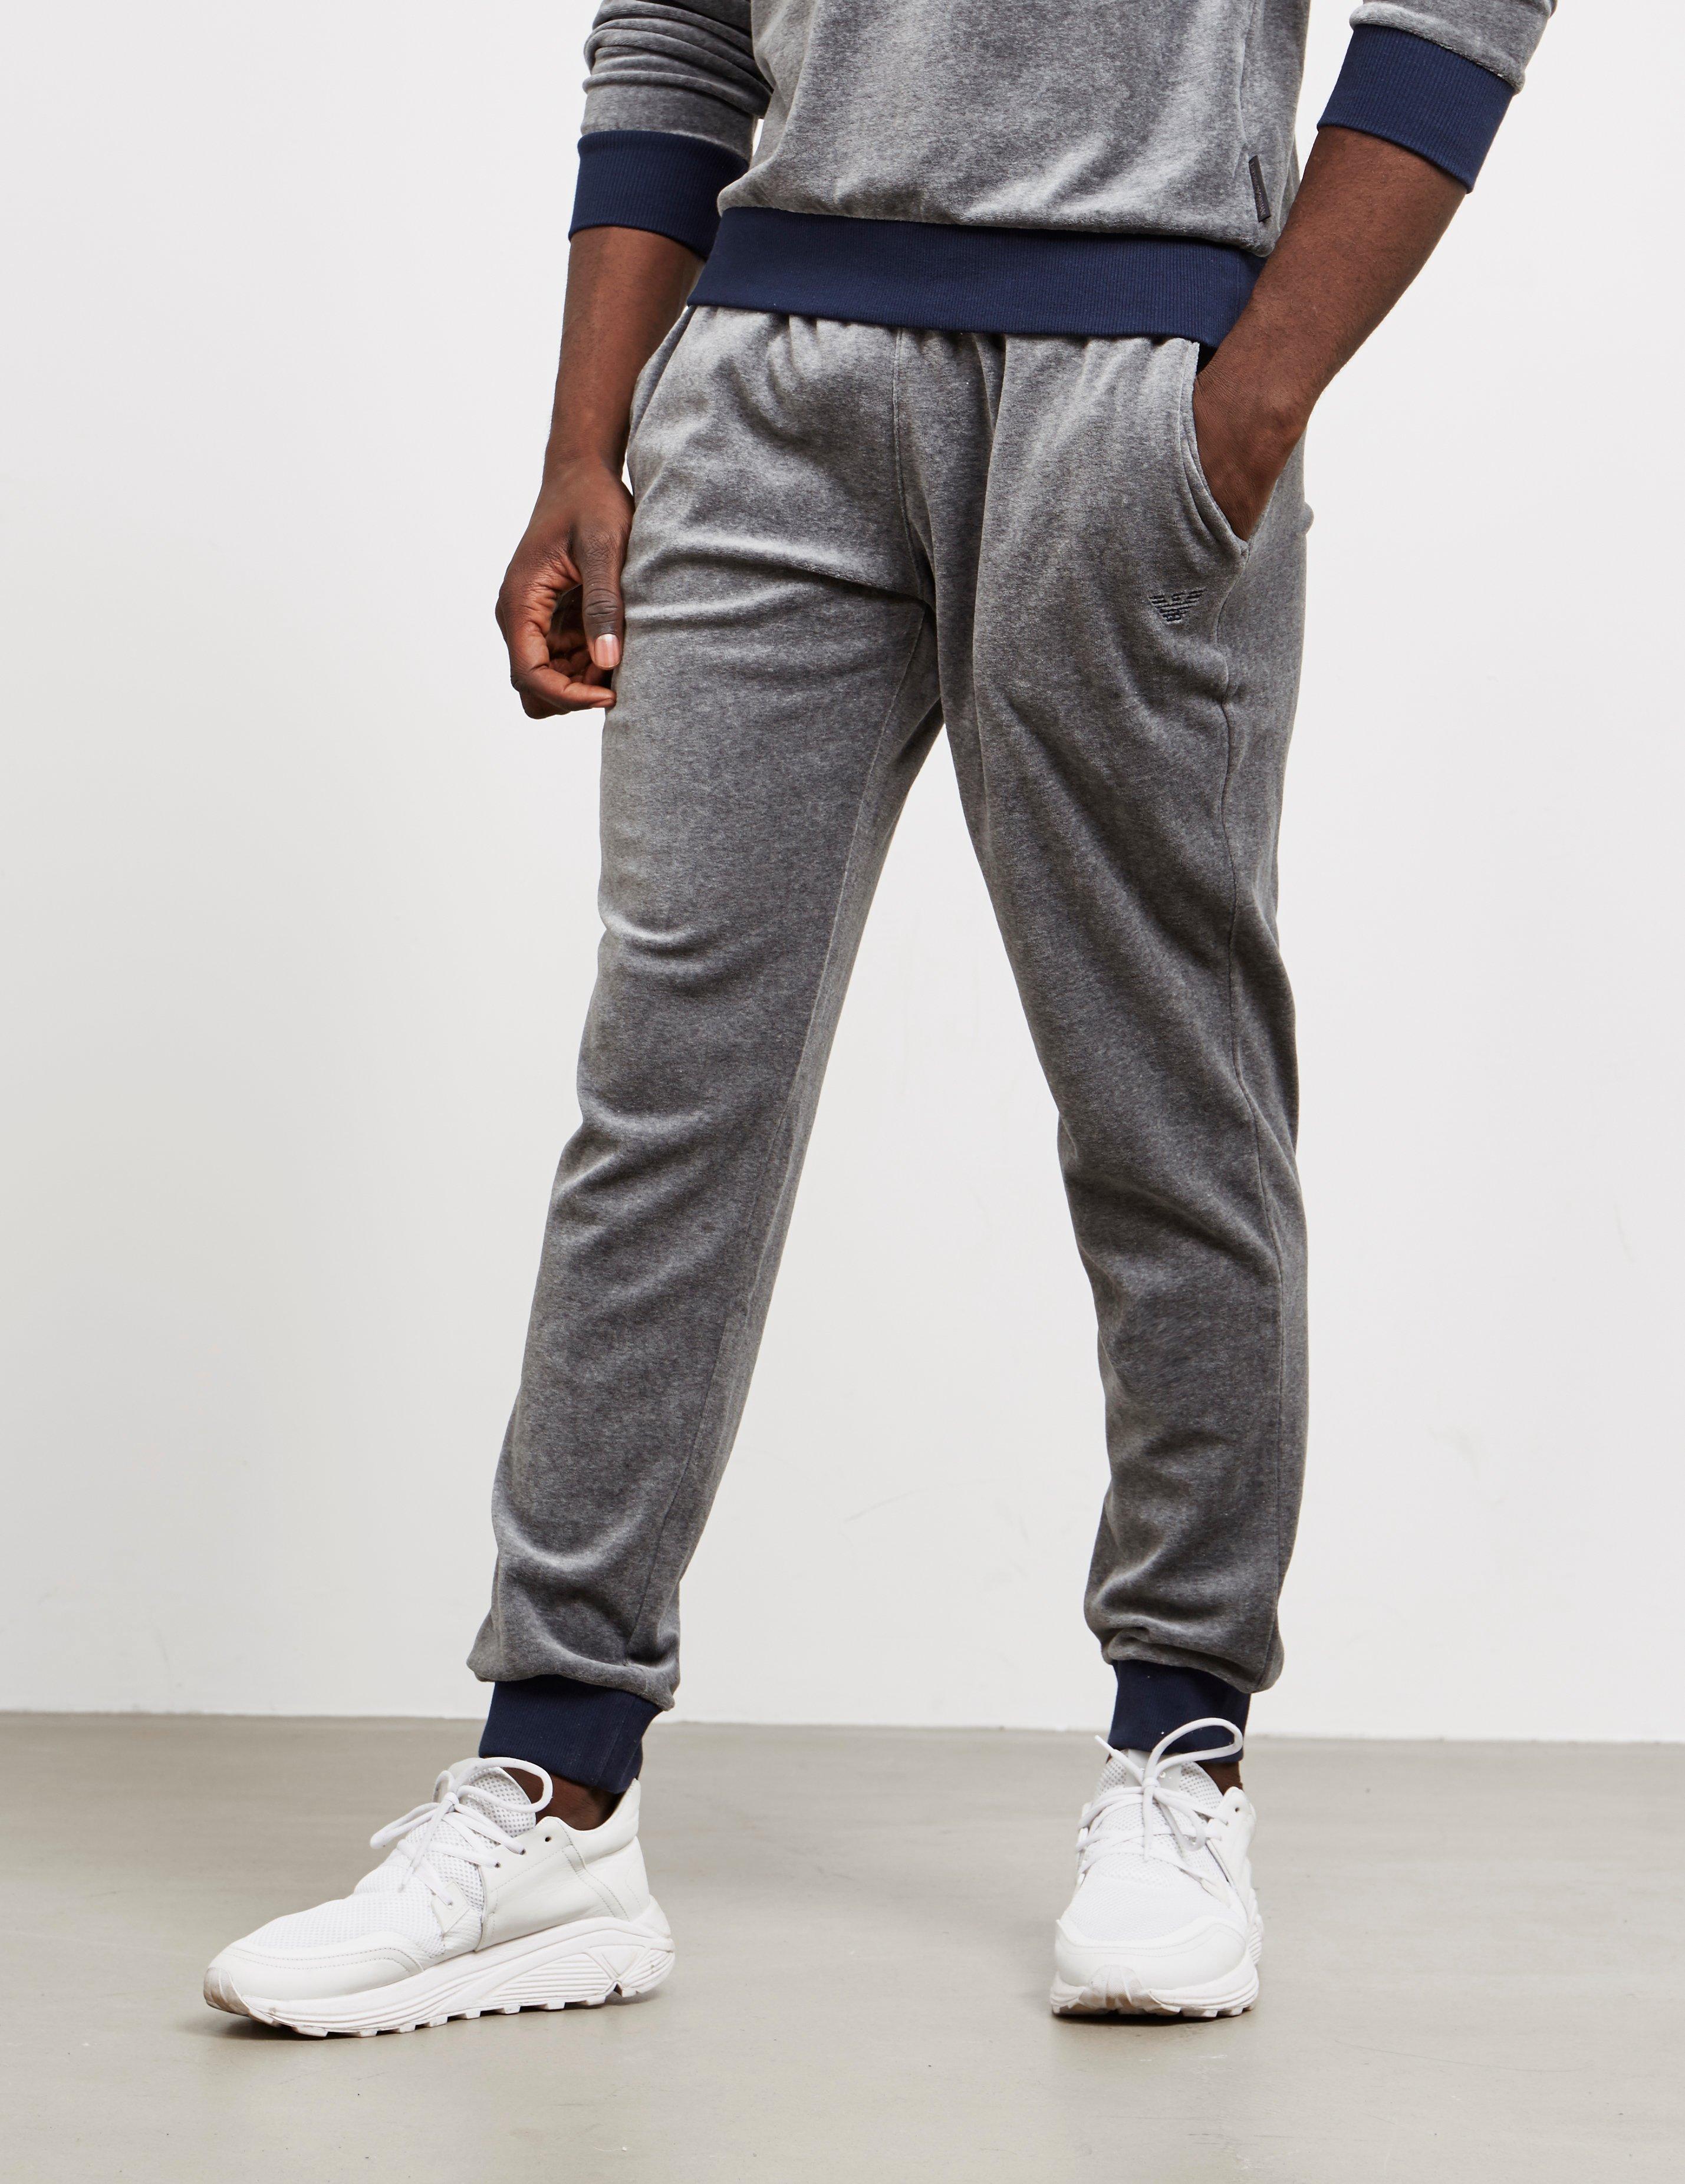 Emporio Armani Mens Velour Cuffed Track Pants Grey in Gray for Men - Lyst